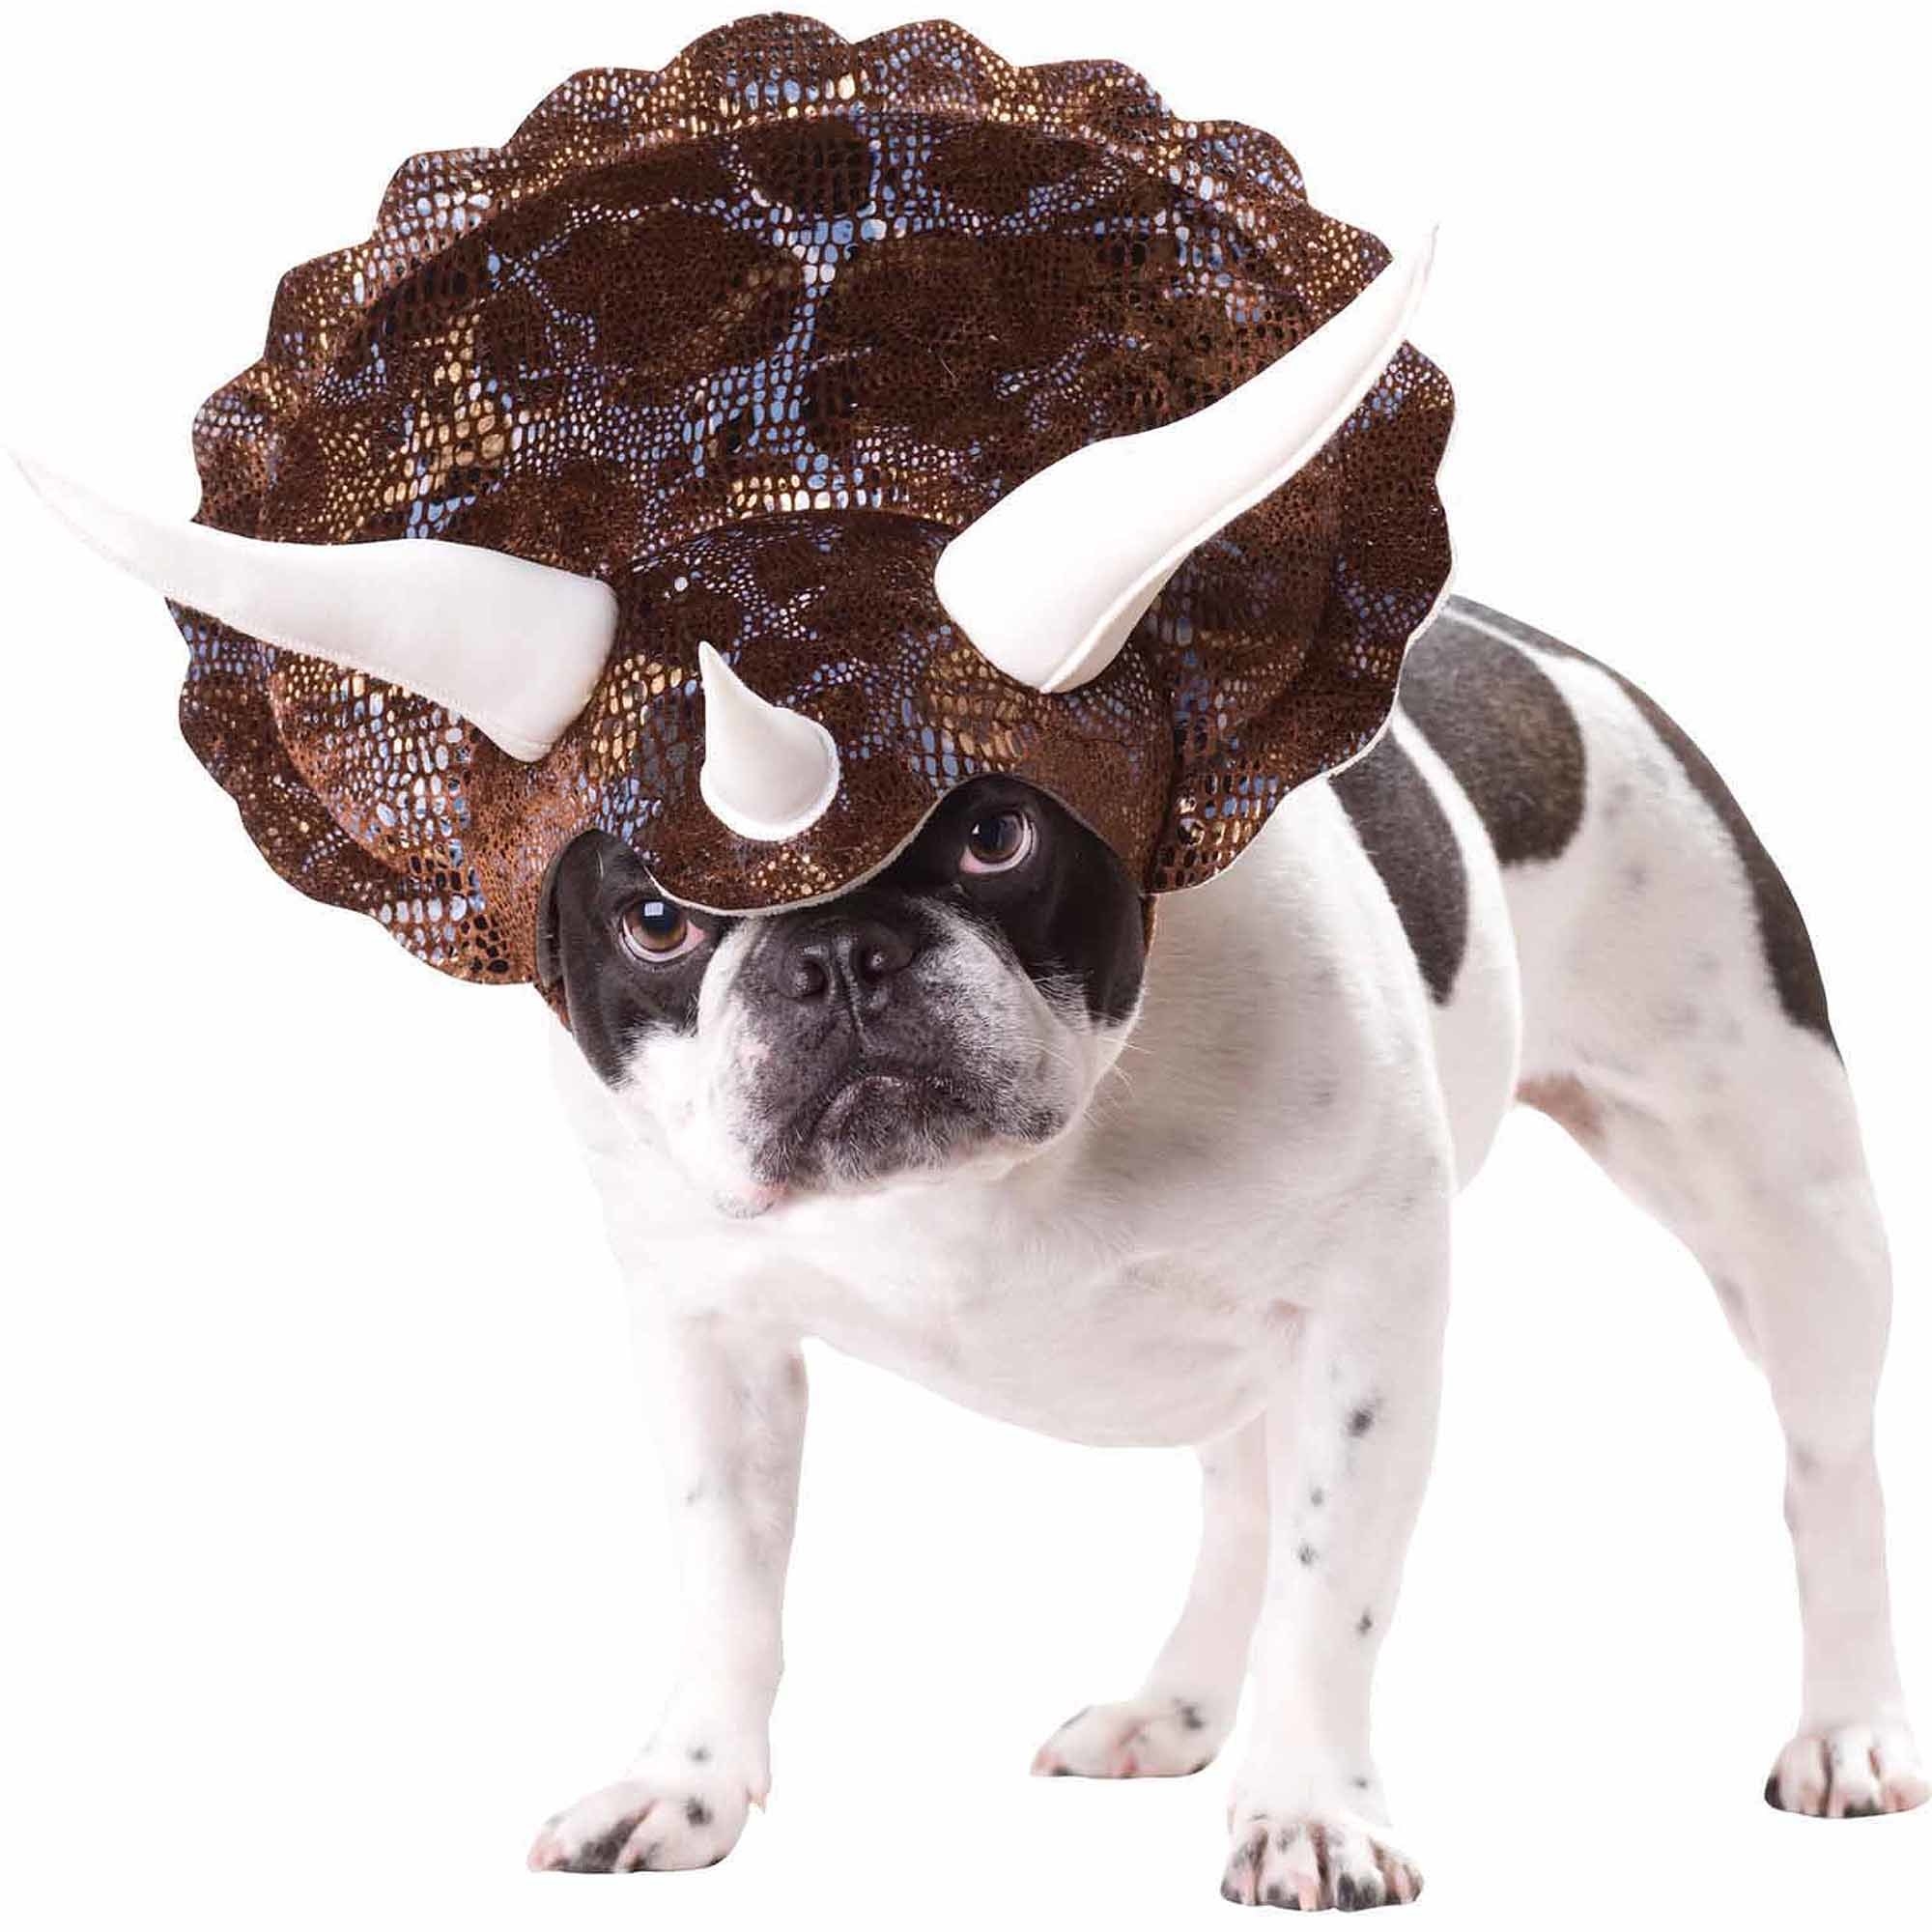 dog wearing the triceratops costume